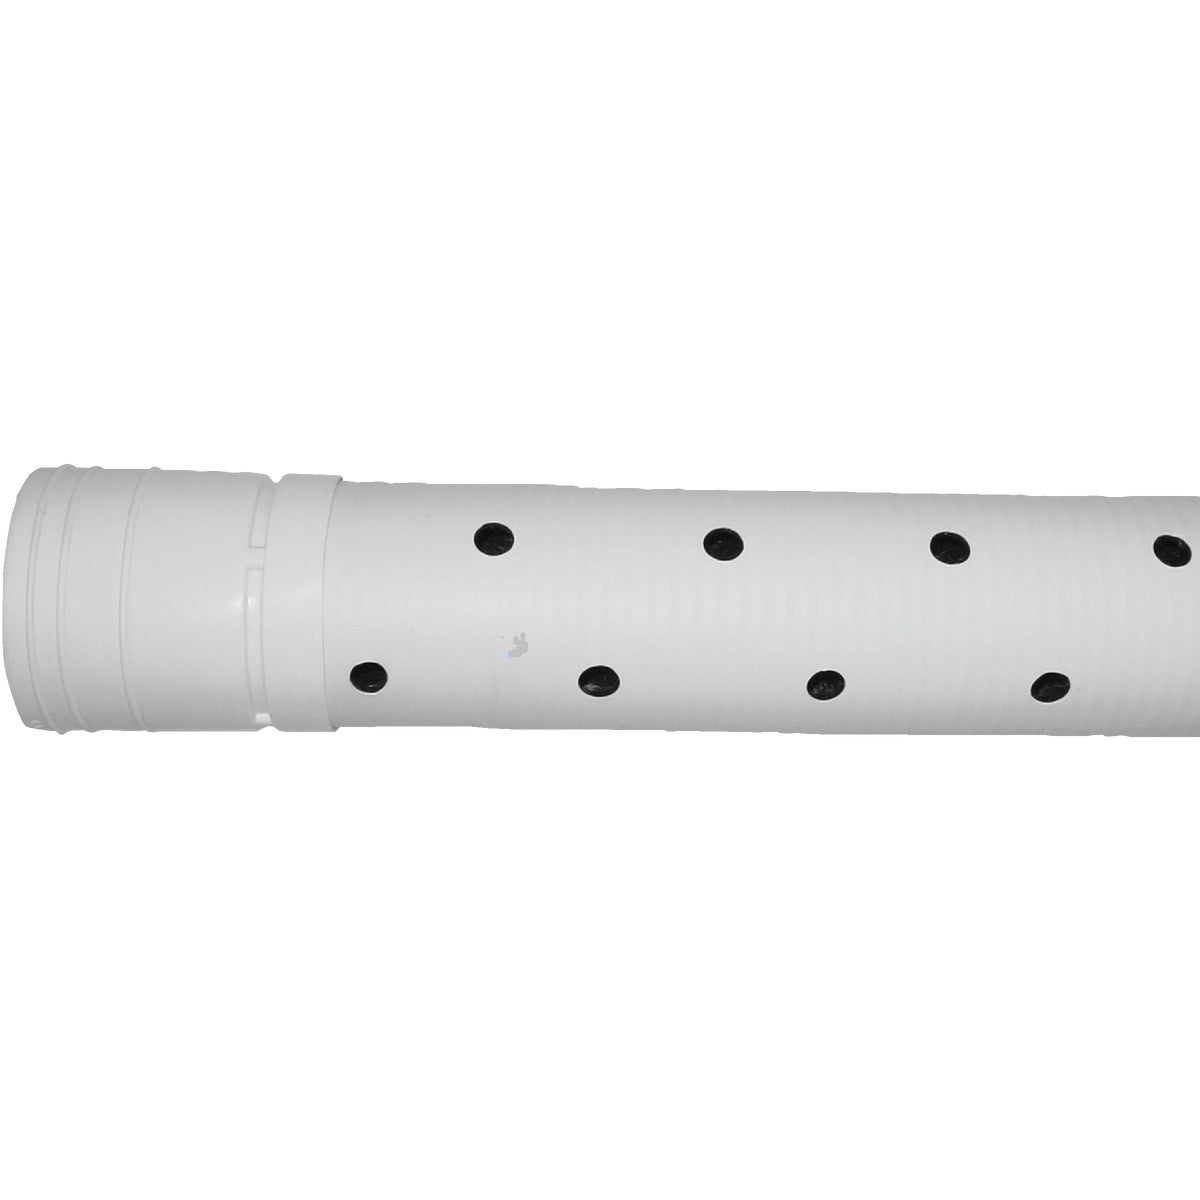 Advanced Drainage Systems 4 In. X 10 Ft. HDPE Perforated Sewage & Drainage Pipe